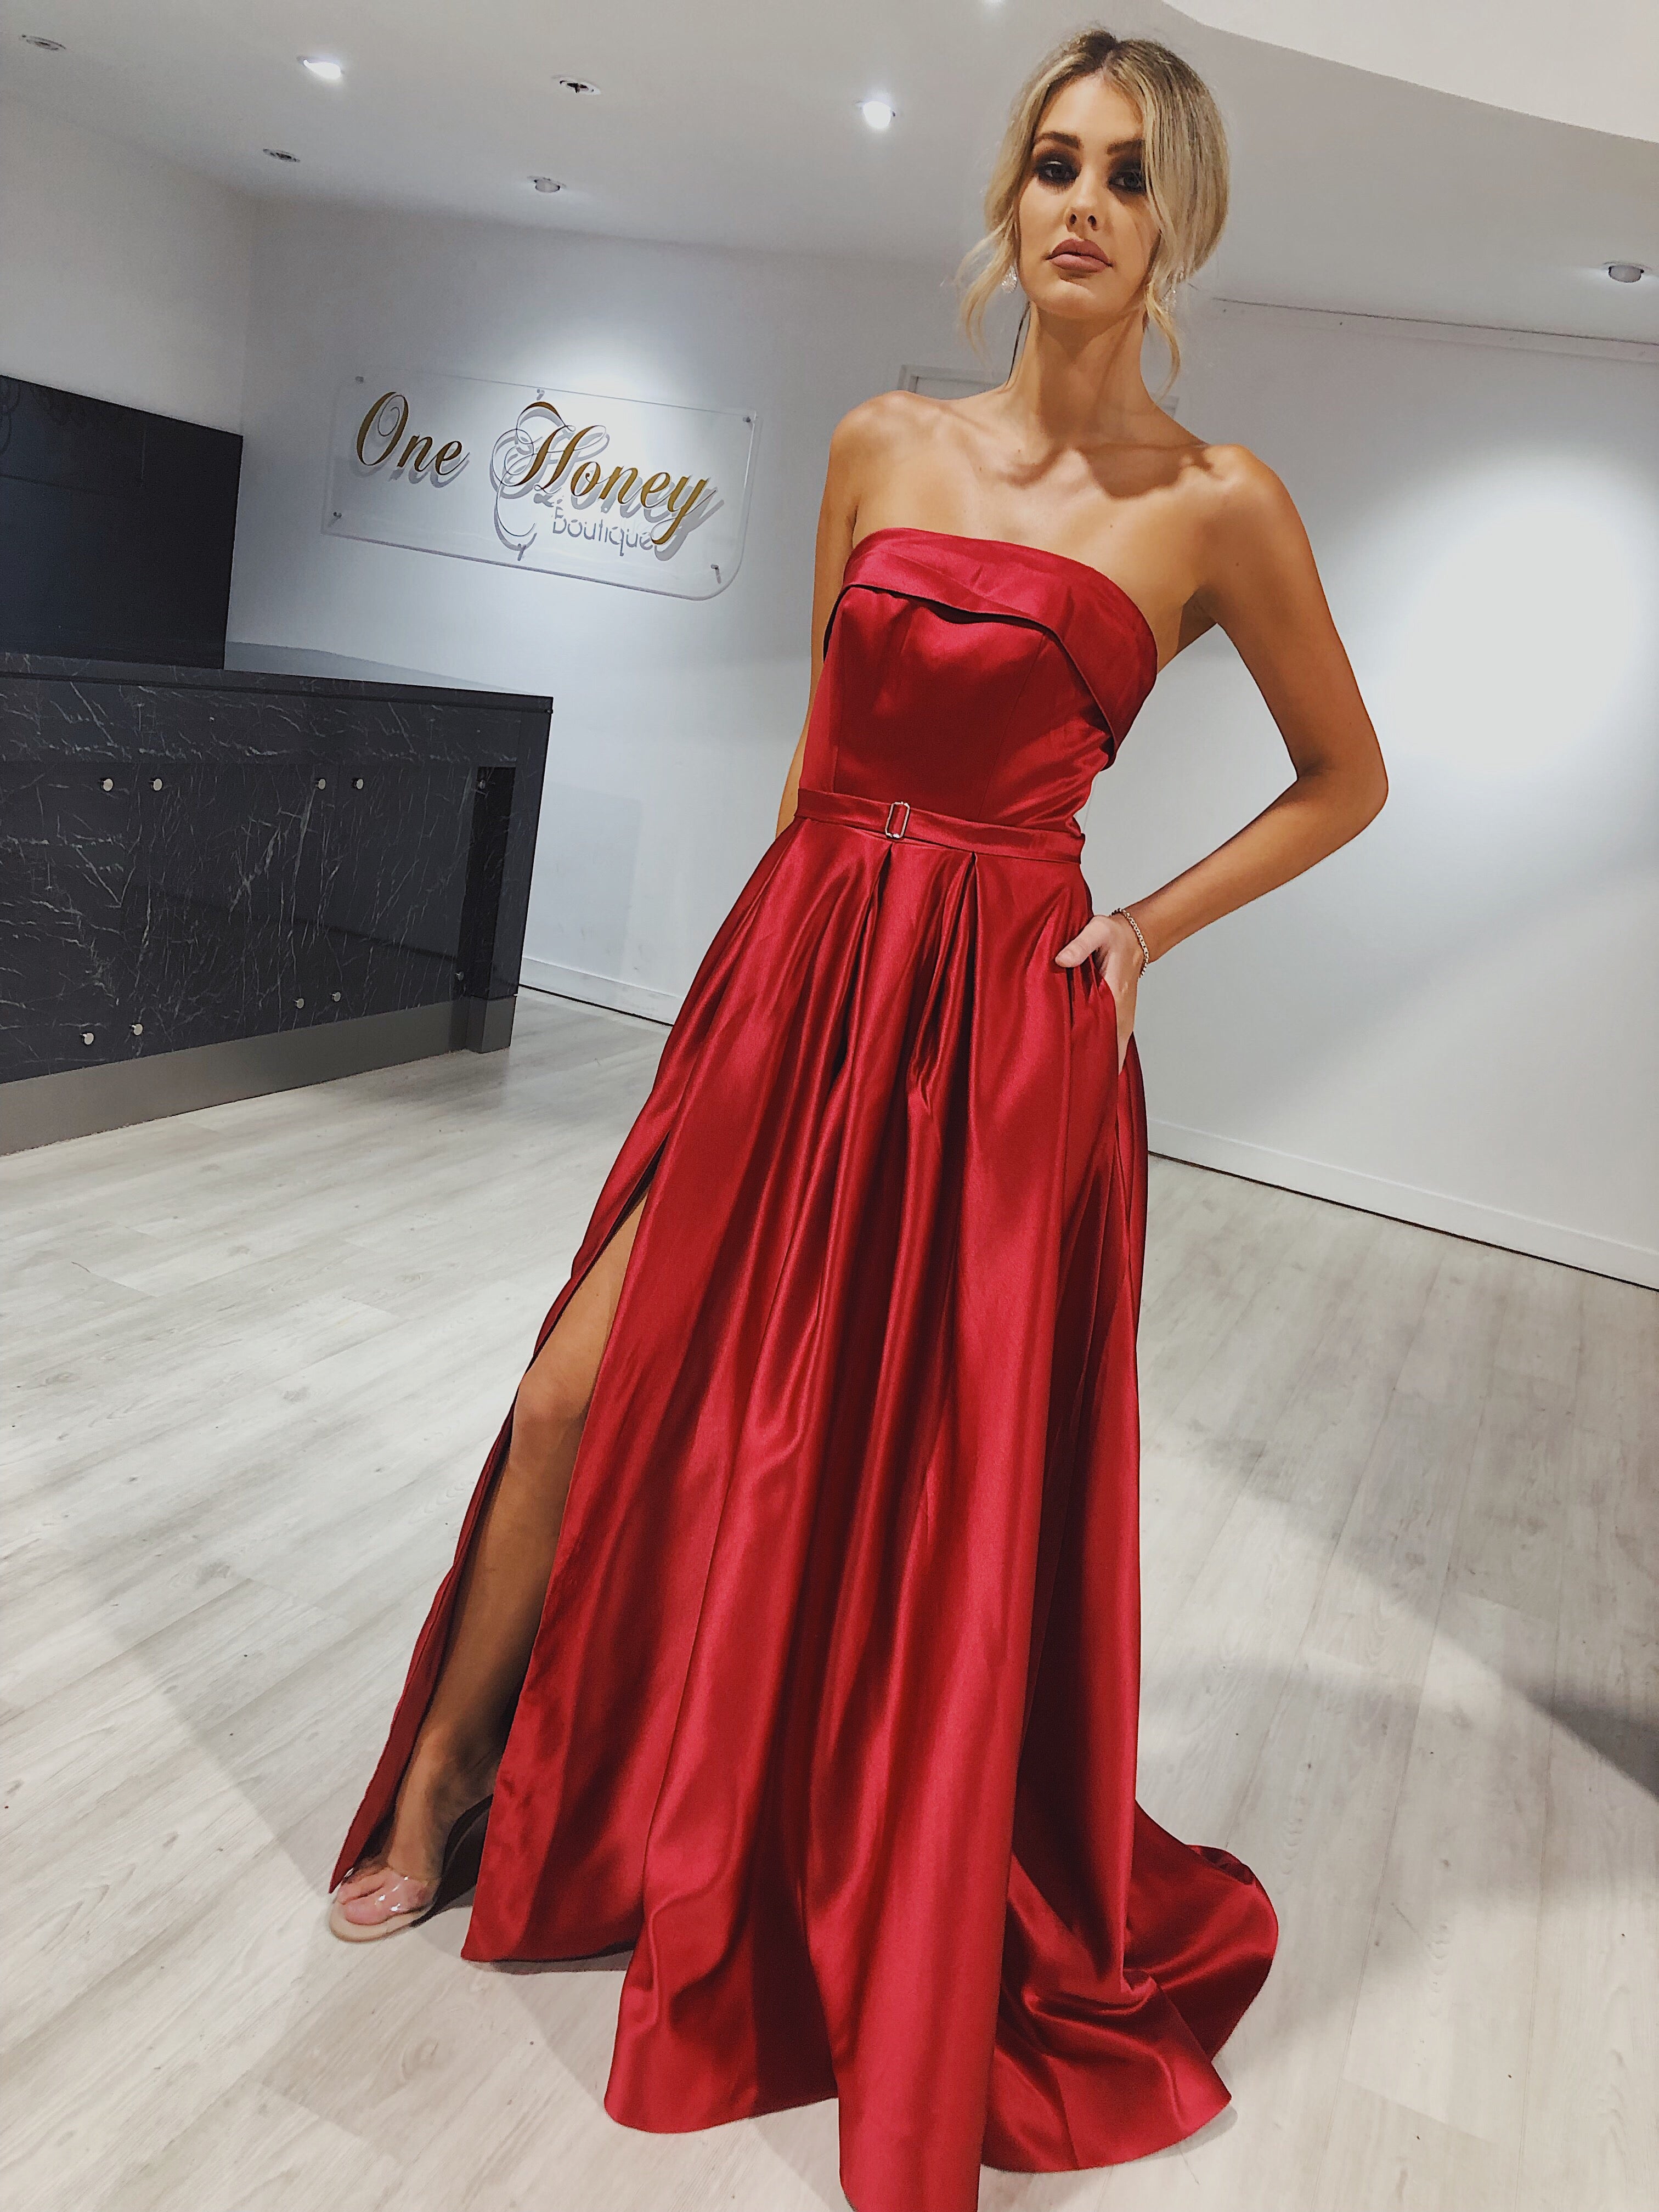 EVIE Red Strapless Formal Gown Private Label$ AfterPay Humm ZipPay LayBuy Sezzle